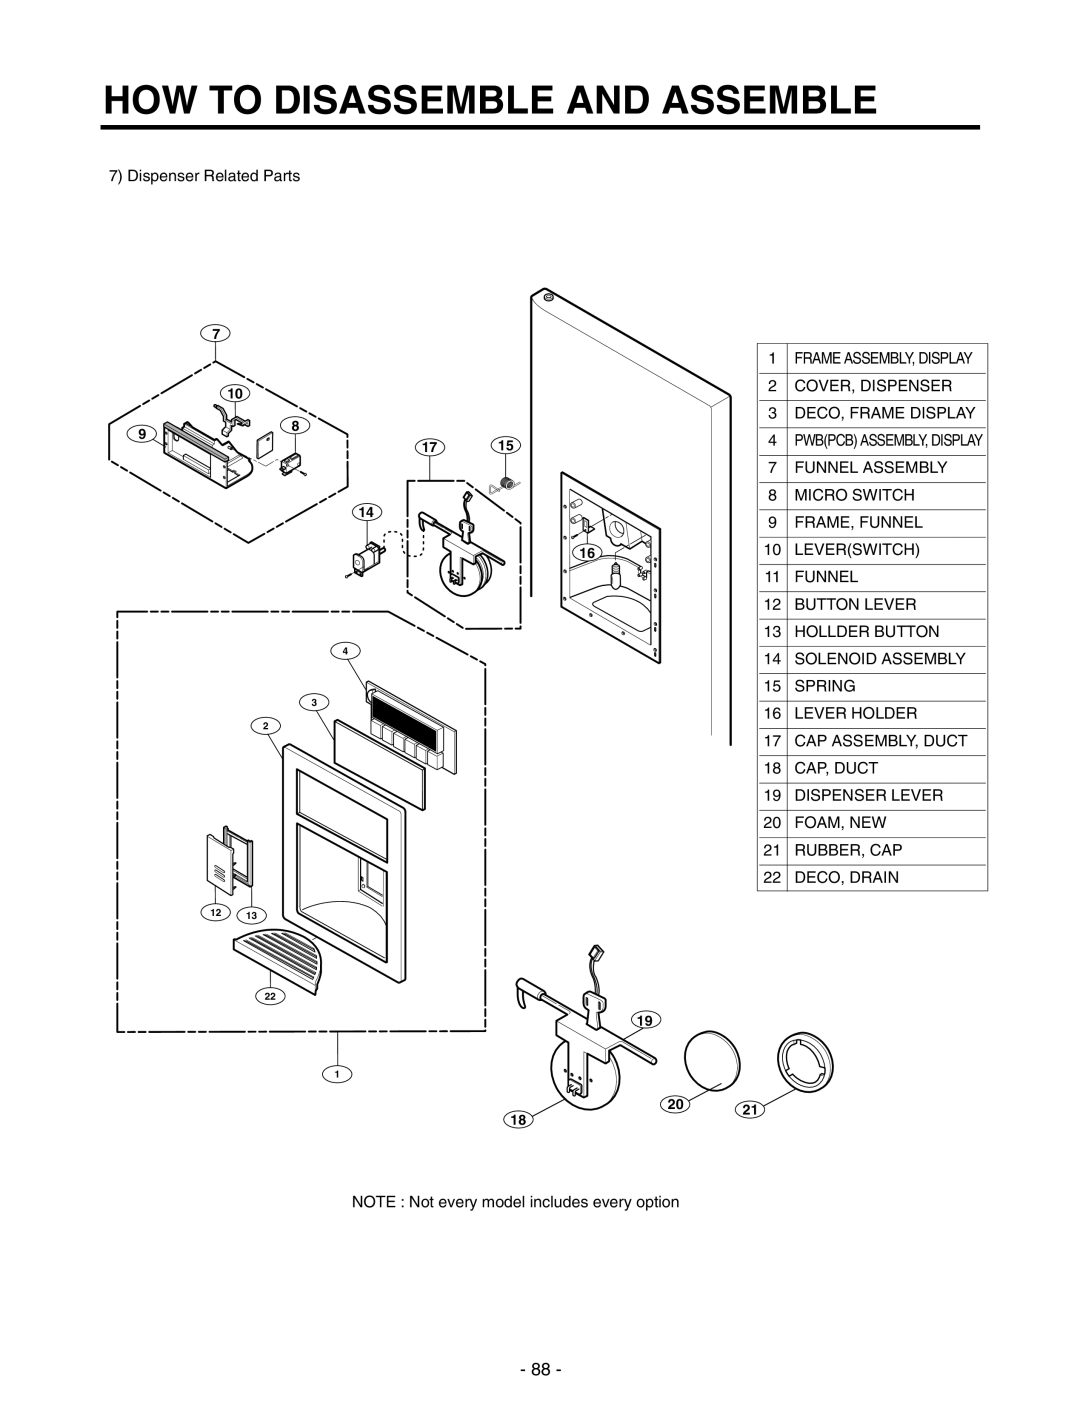 LG Electronics GR-P227/L227, GR-P257/L257 service manual How To Disassemble And Assemble, Dispenser Related Parts 